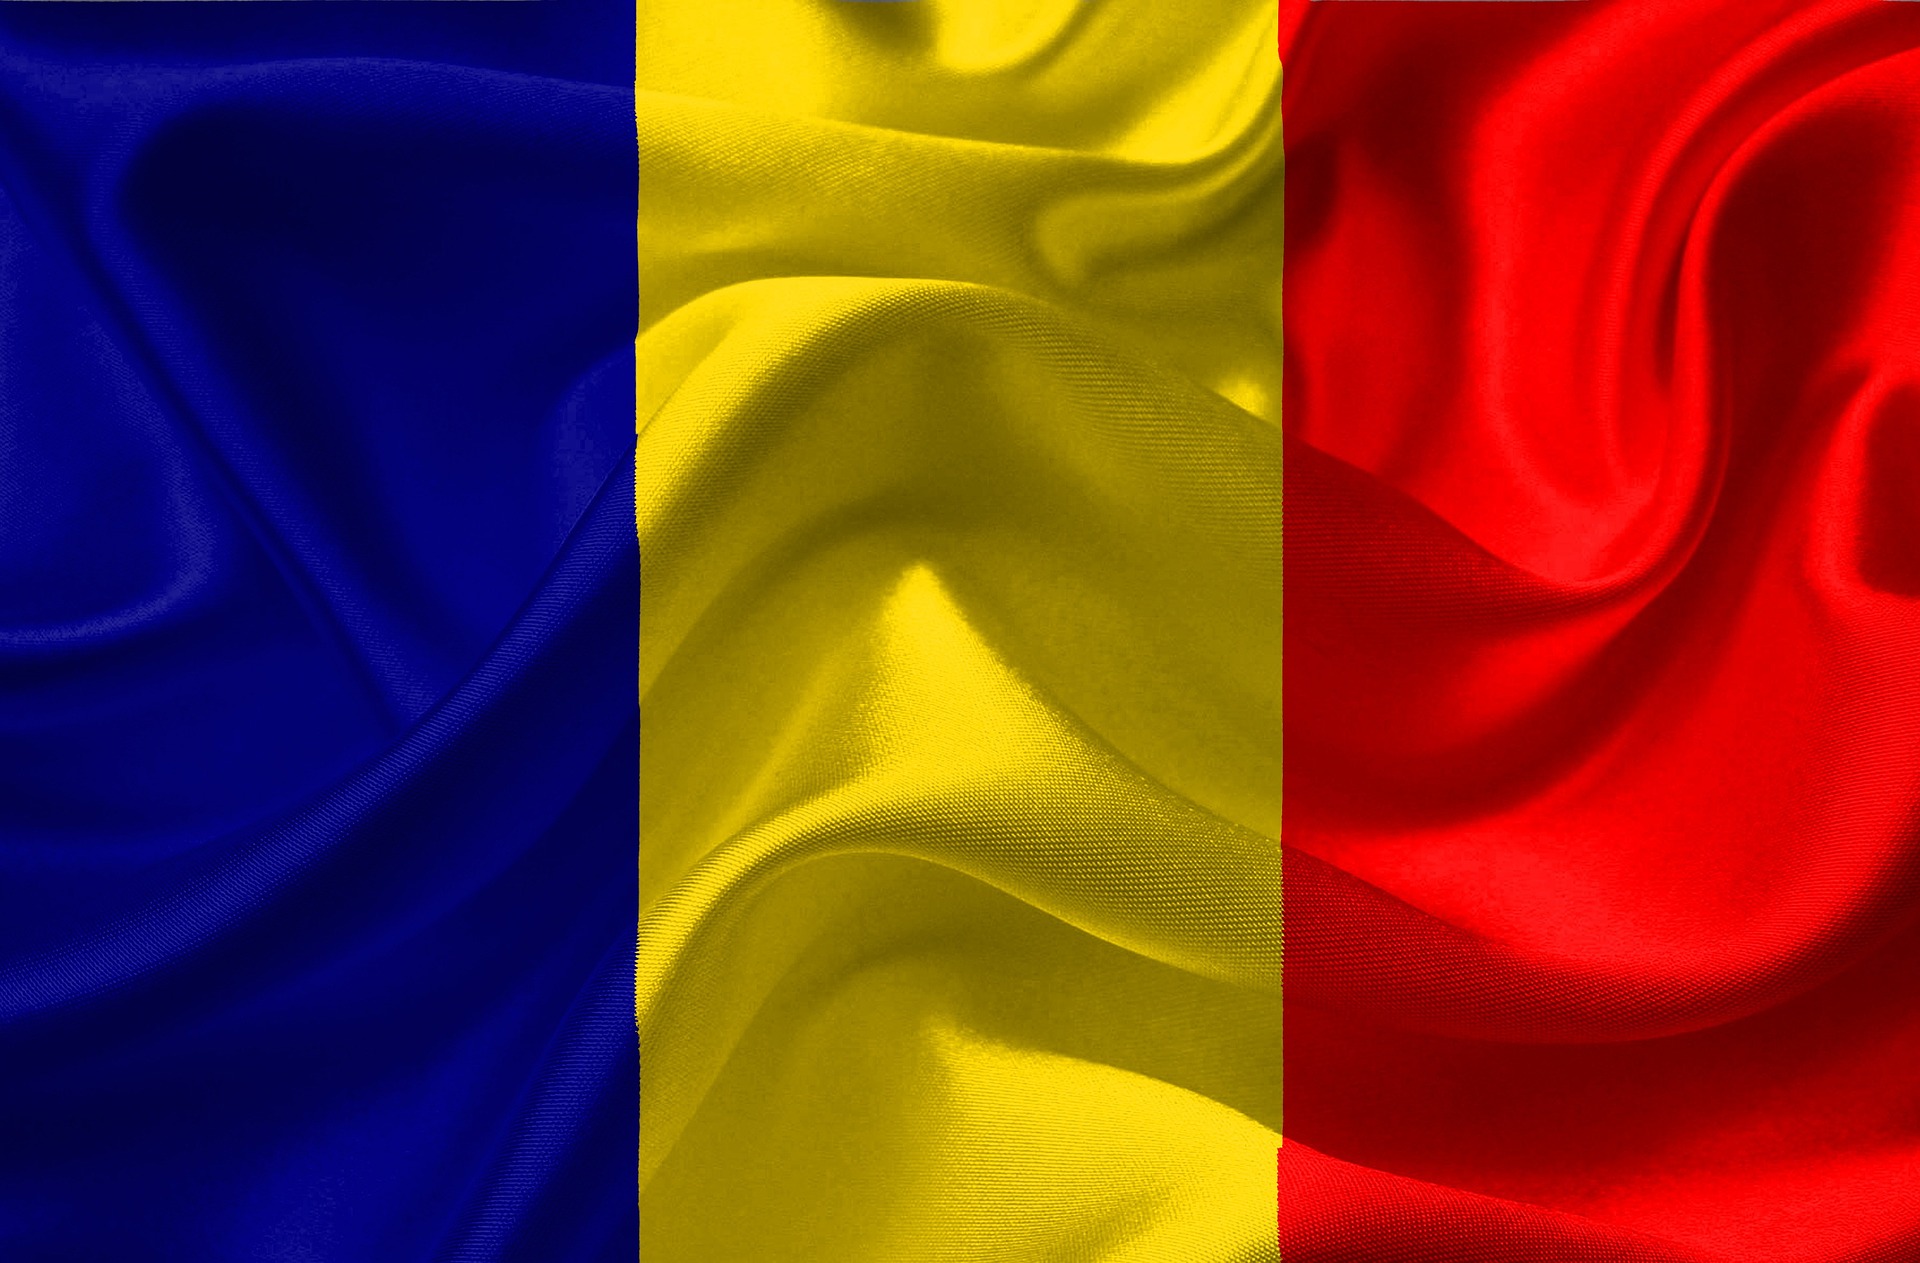 Romanian flag (three vertical stripes: blue yellow and red)